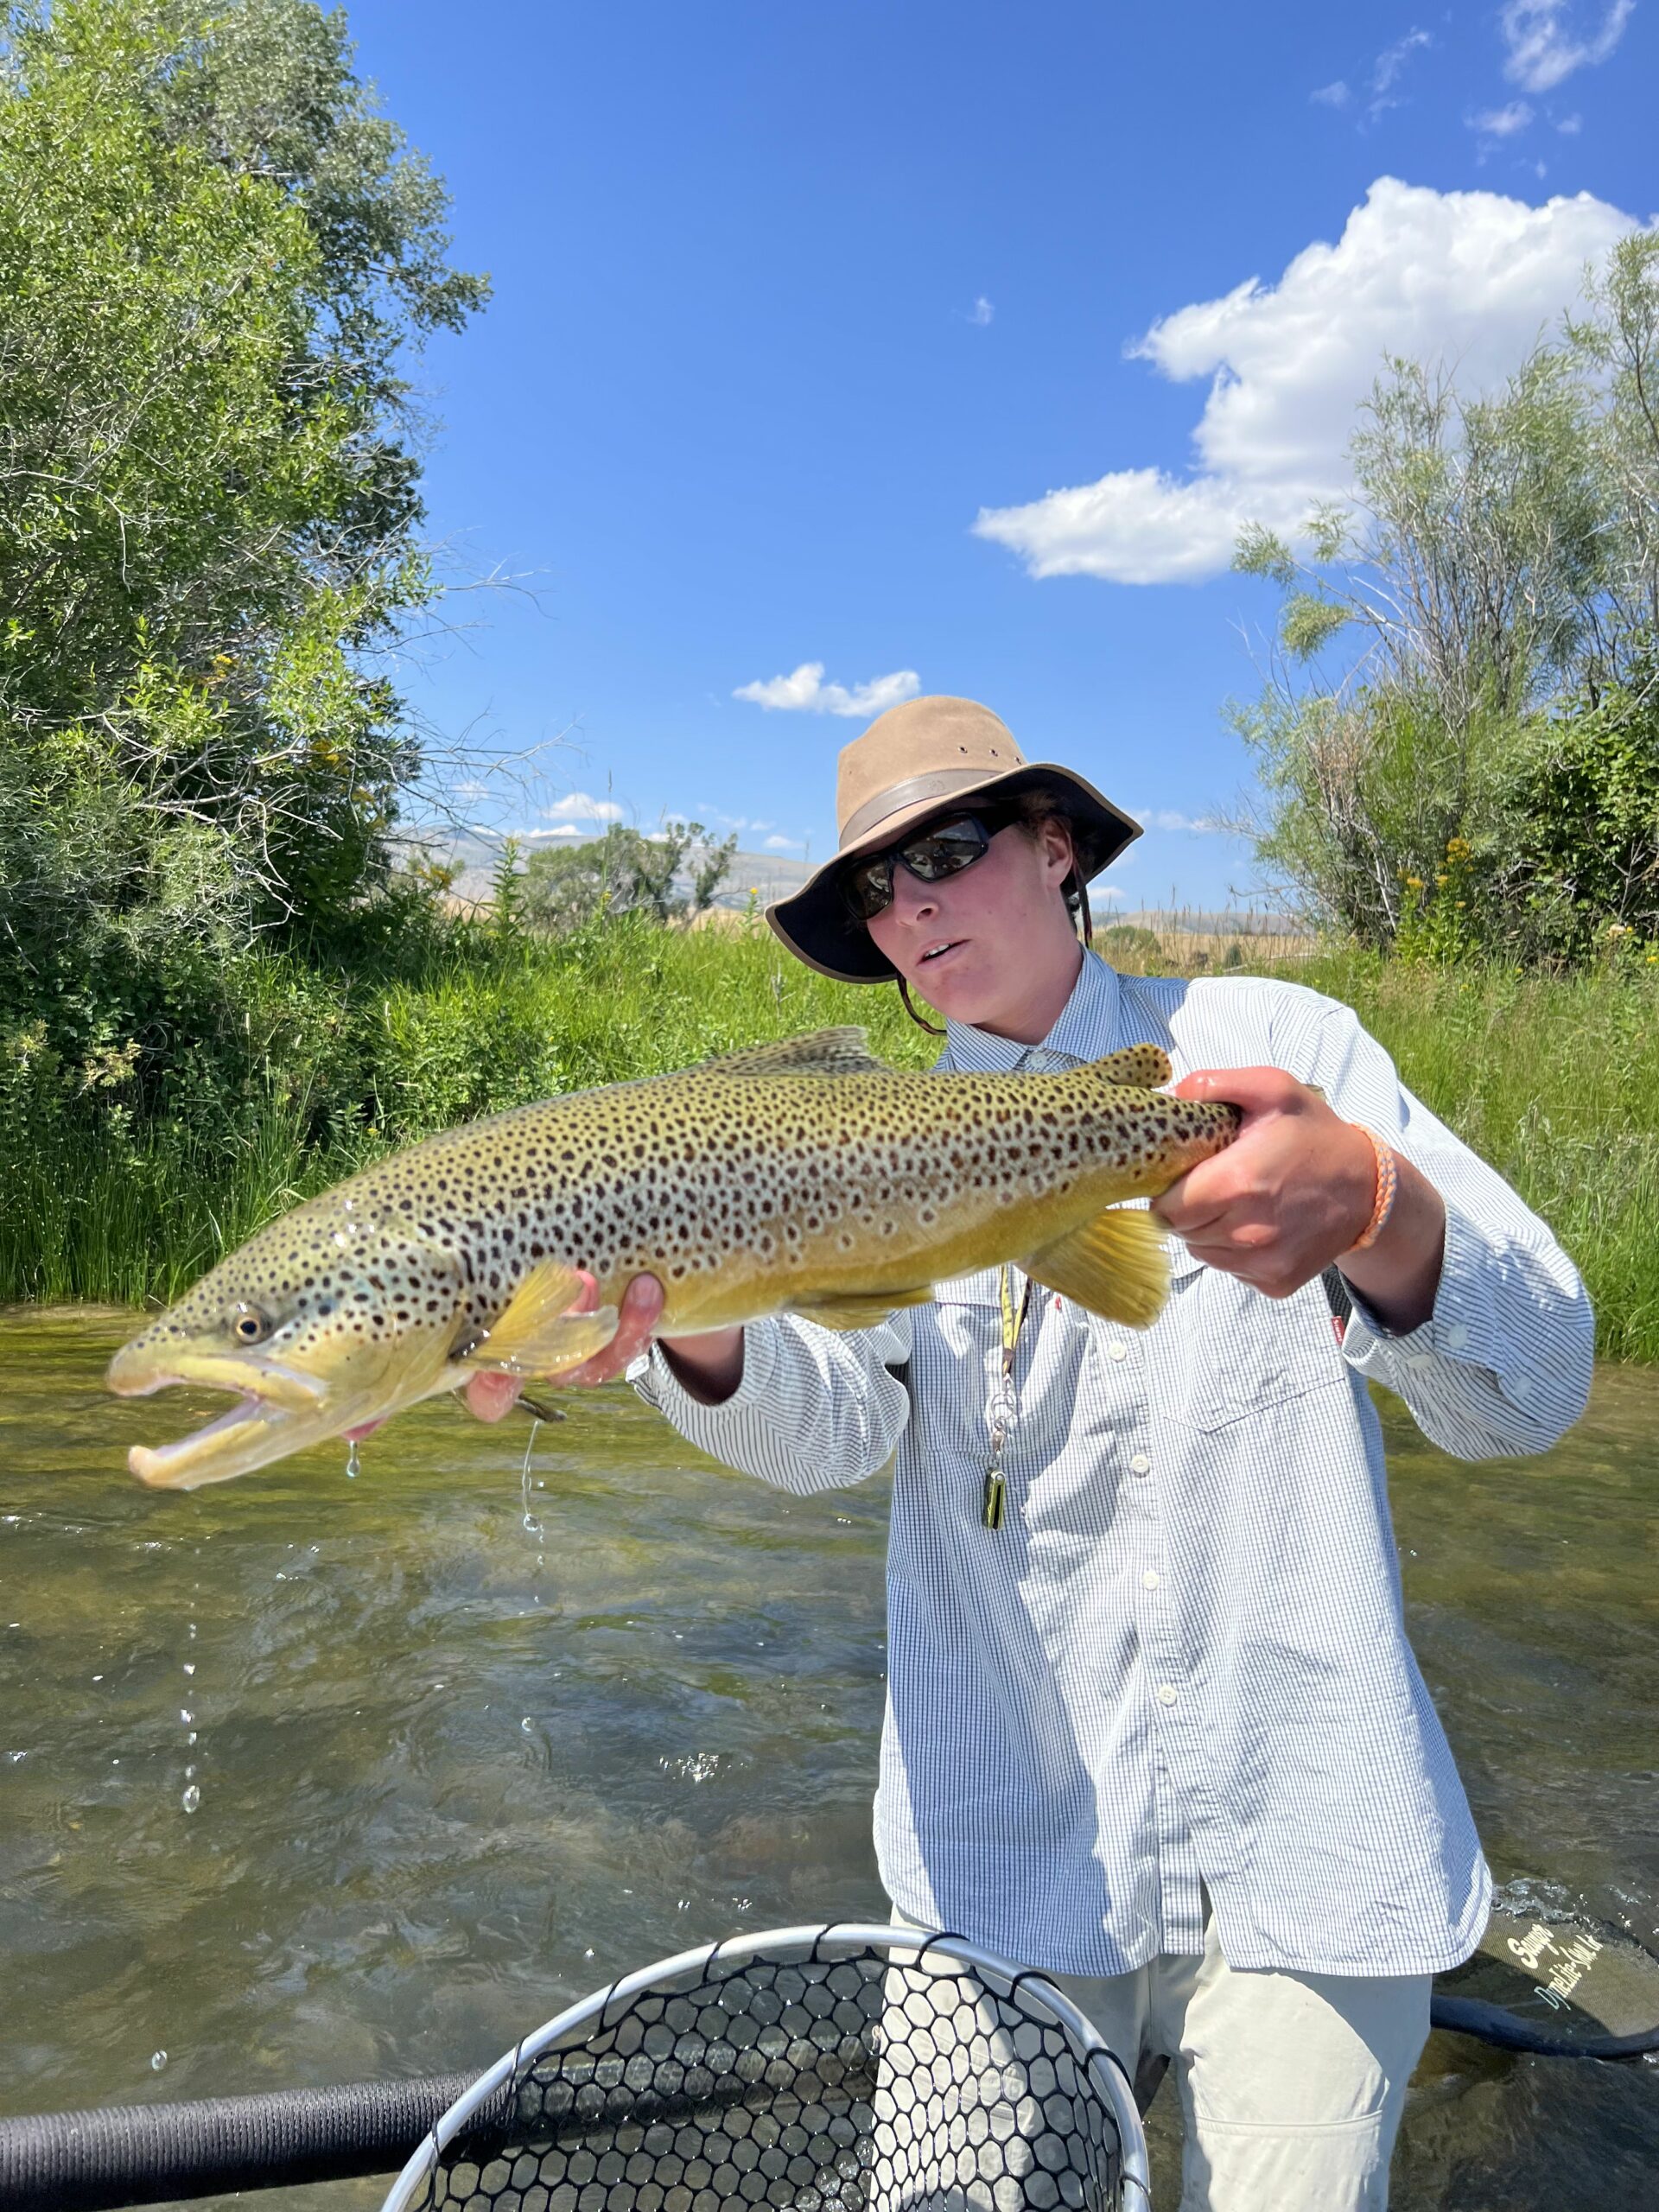 MT Trout Co Guide with large fish